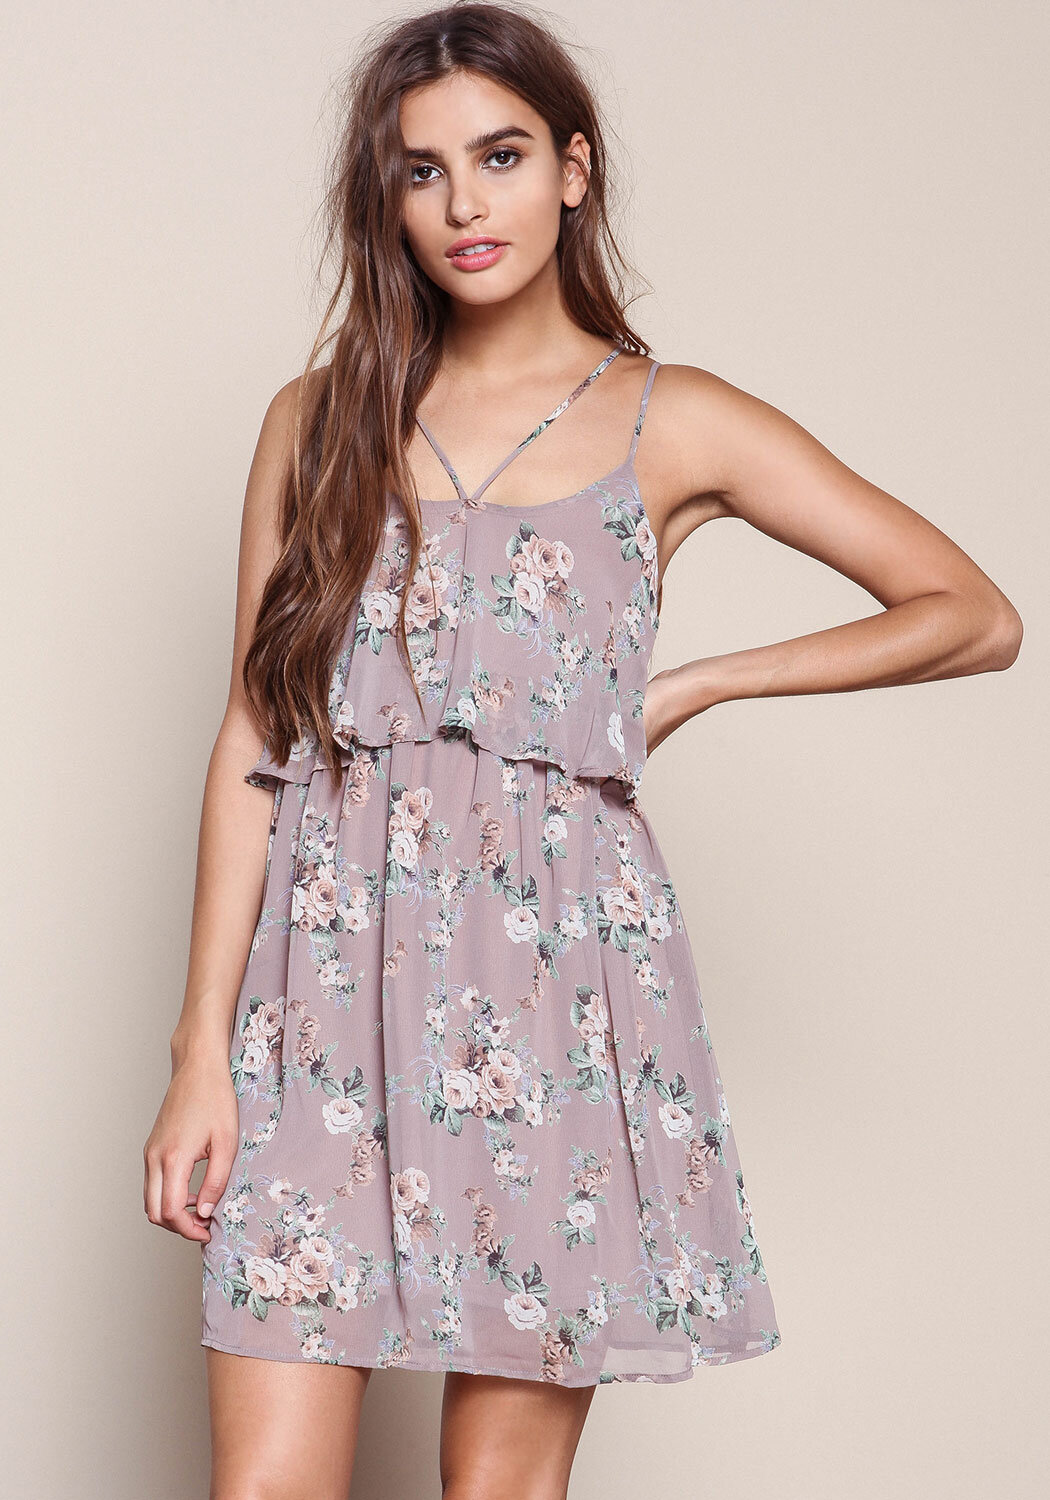 Junior Clothing | Mauve Floral Strappy Tiered Dress | Loveculture.com